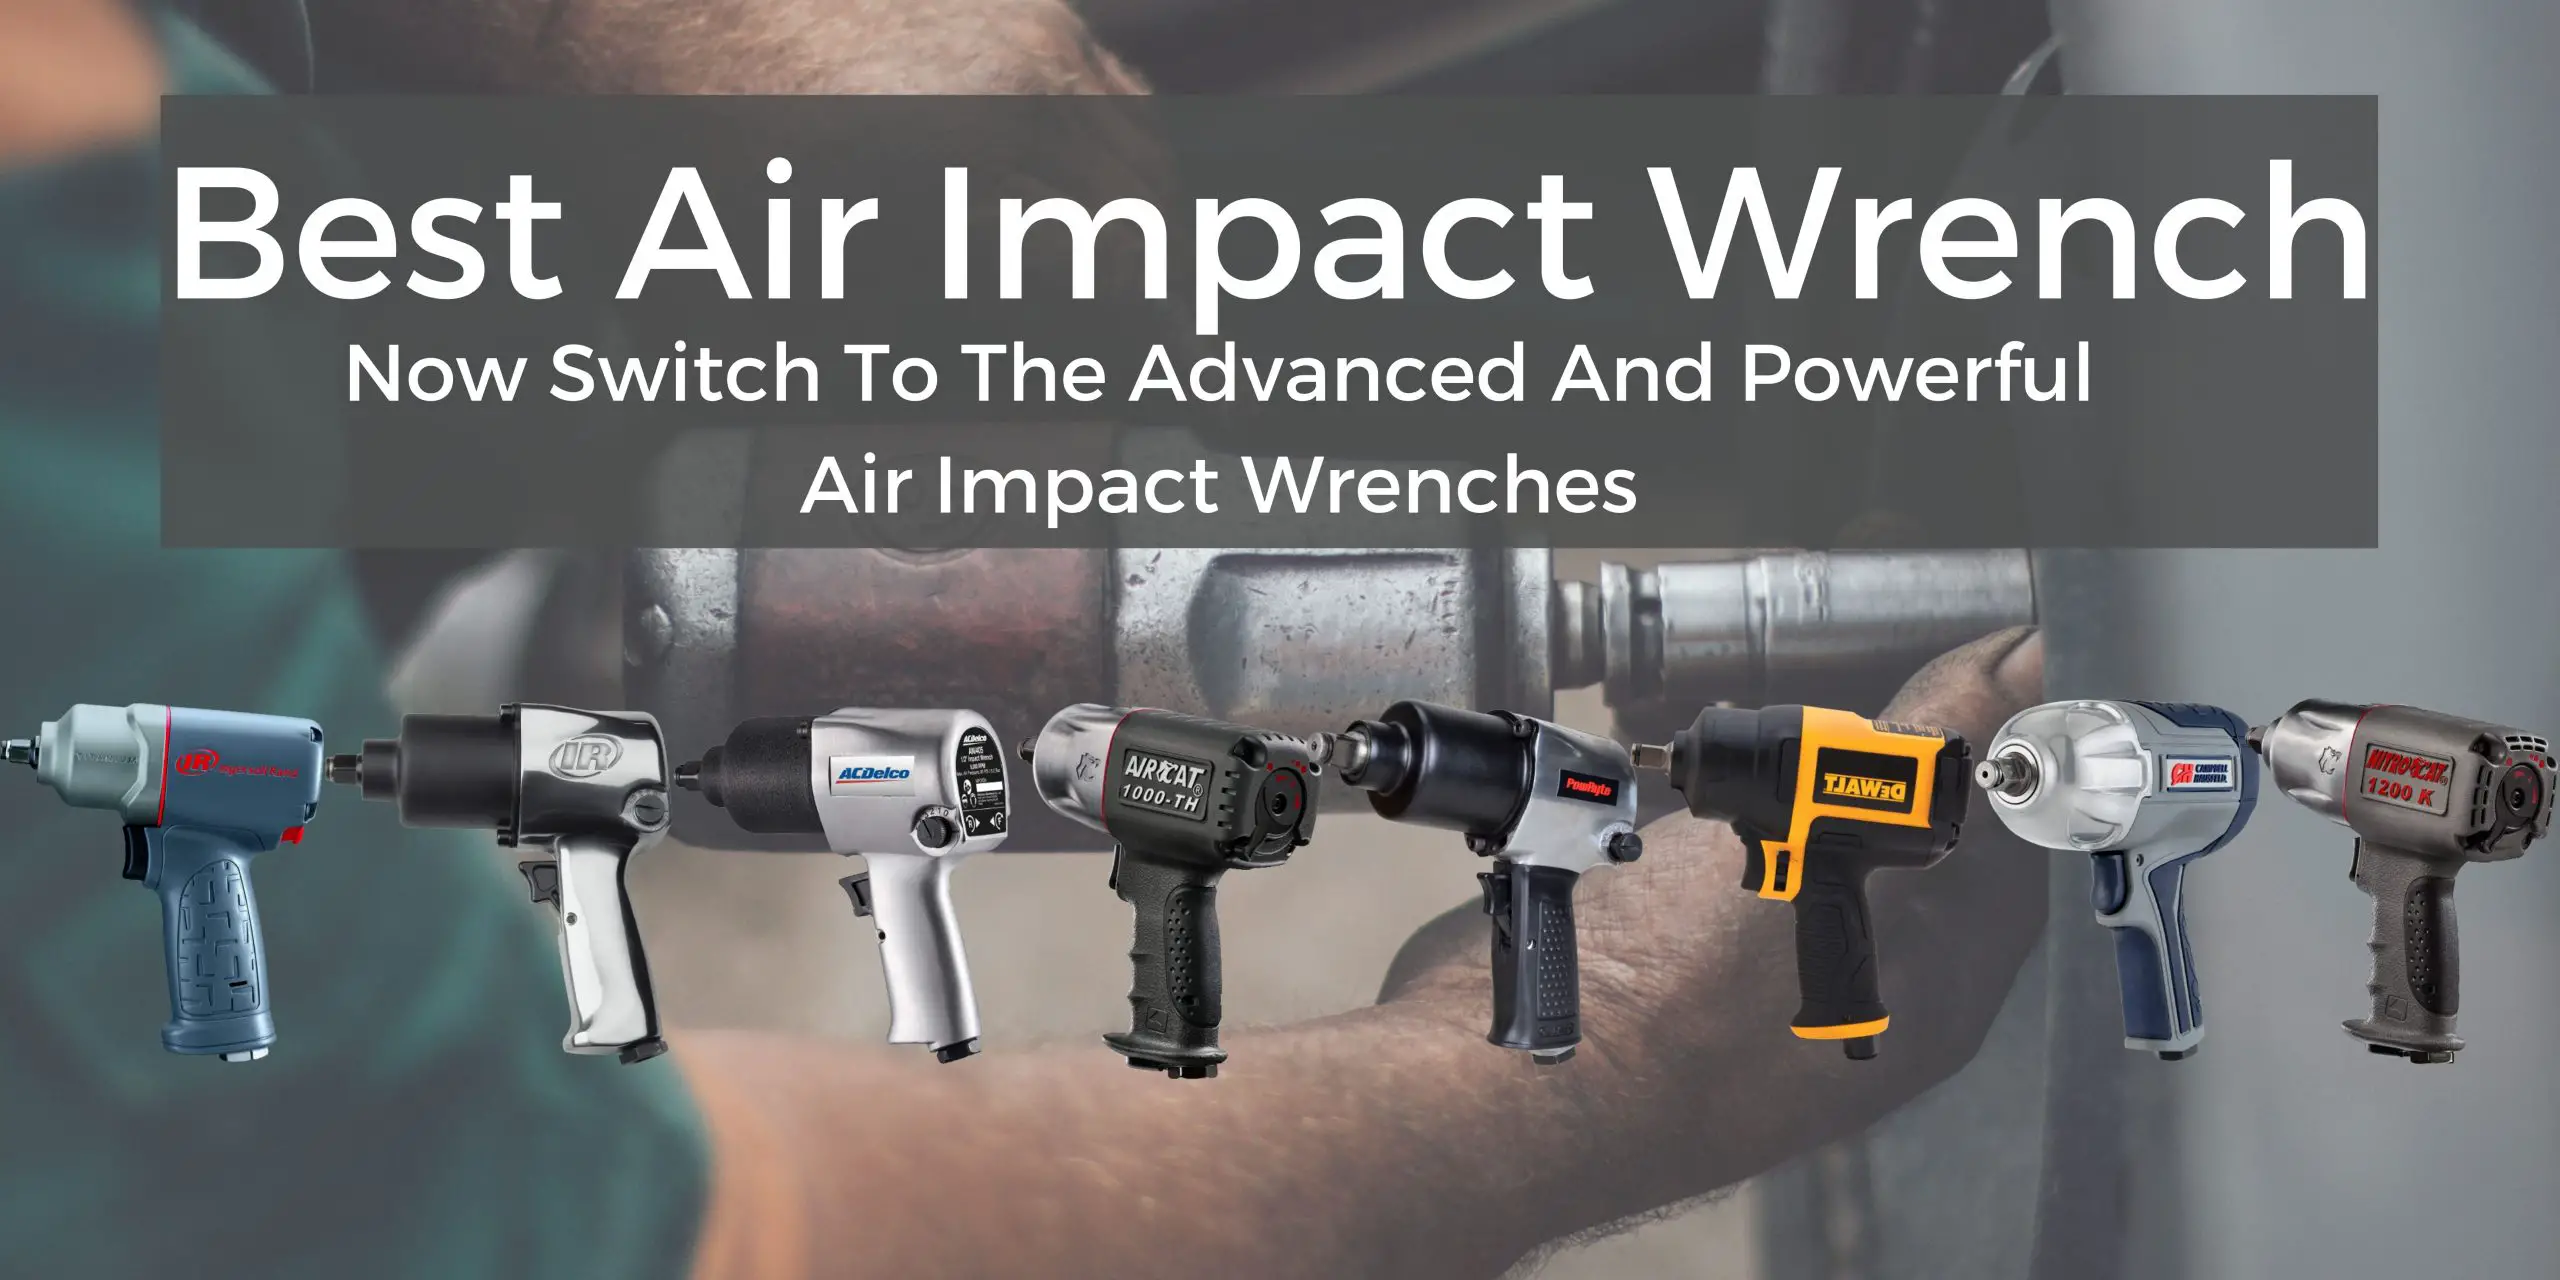 Best Air Impact Wrench